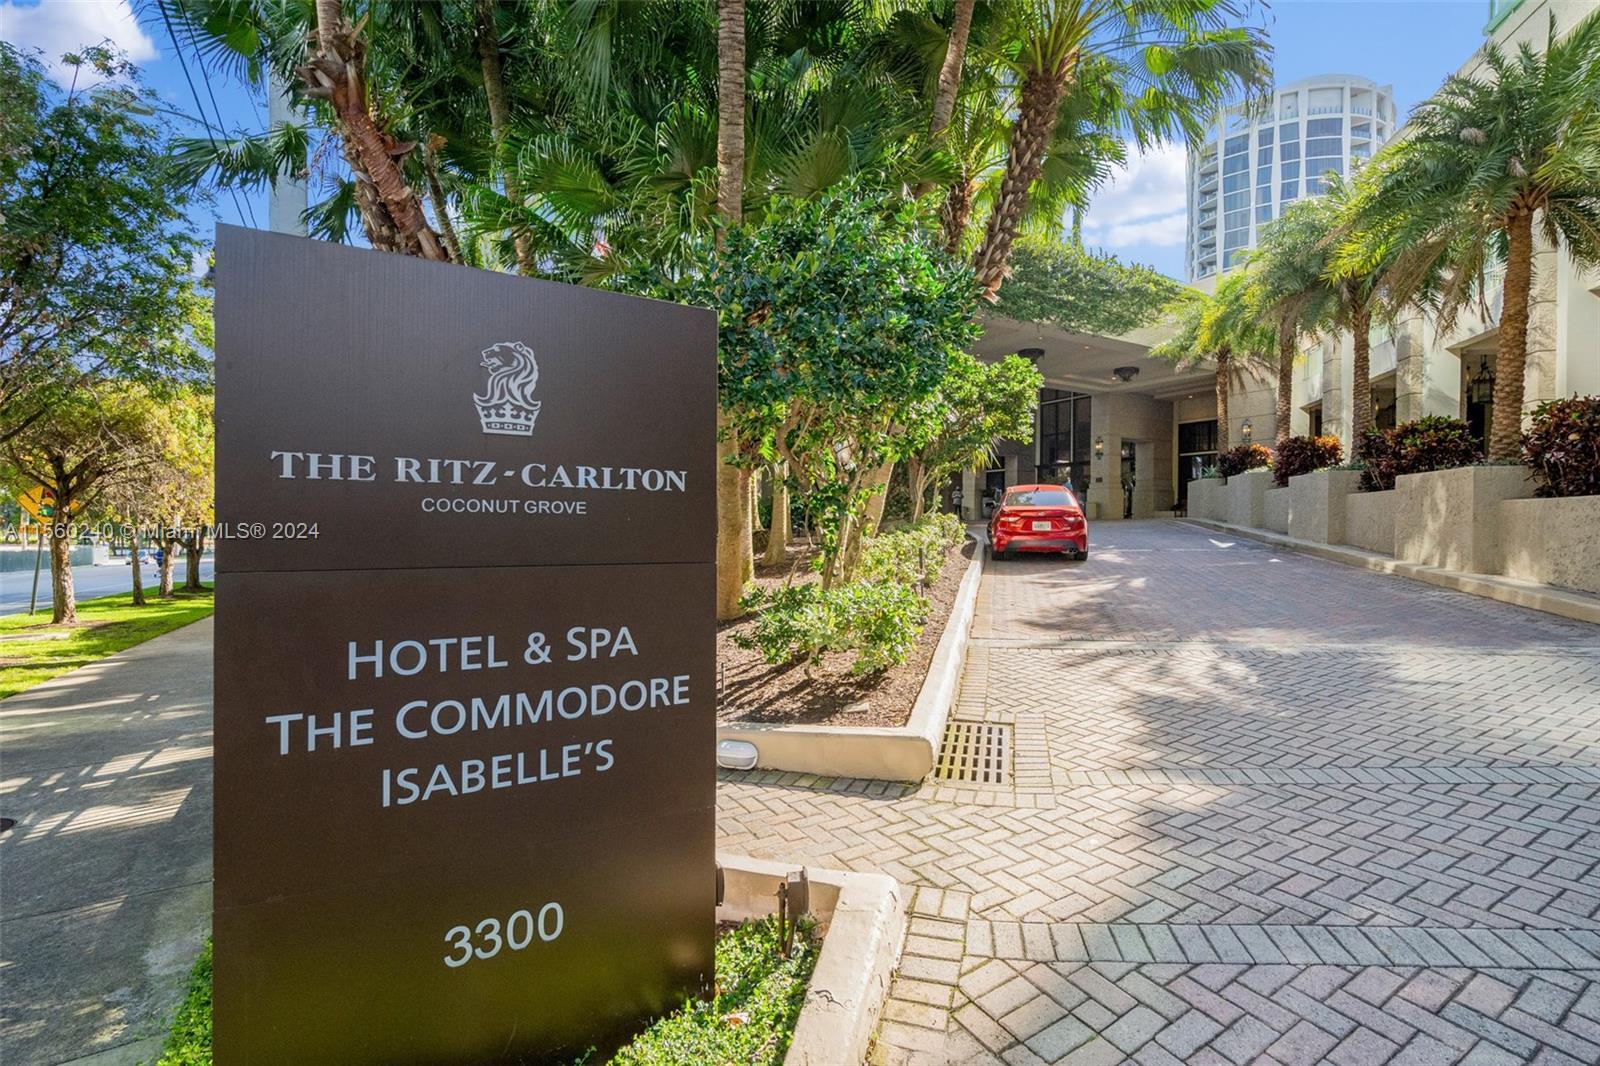 Live  at the Ritz-Carlton Coconut Grove one of Miami's most prestigious neighborhoods. Offering a lu